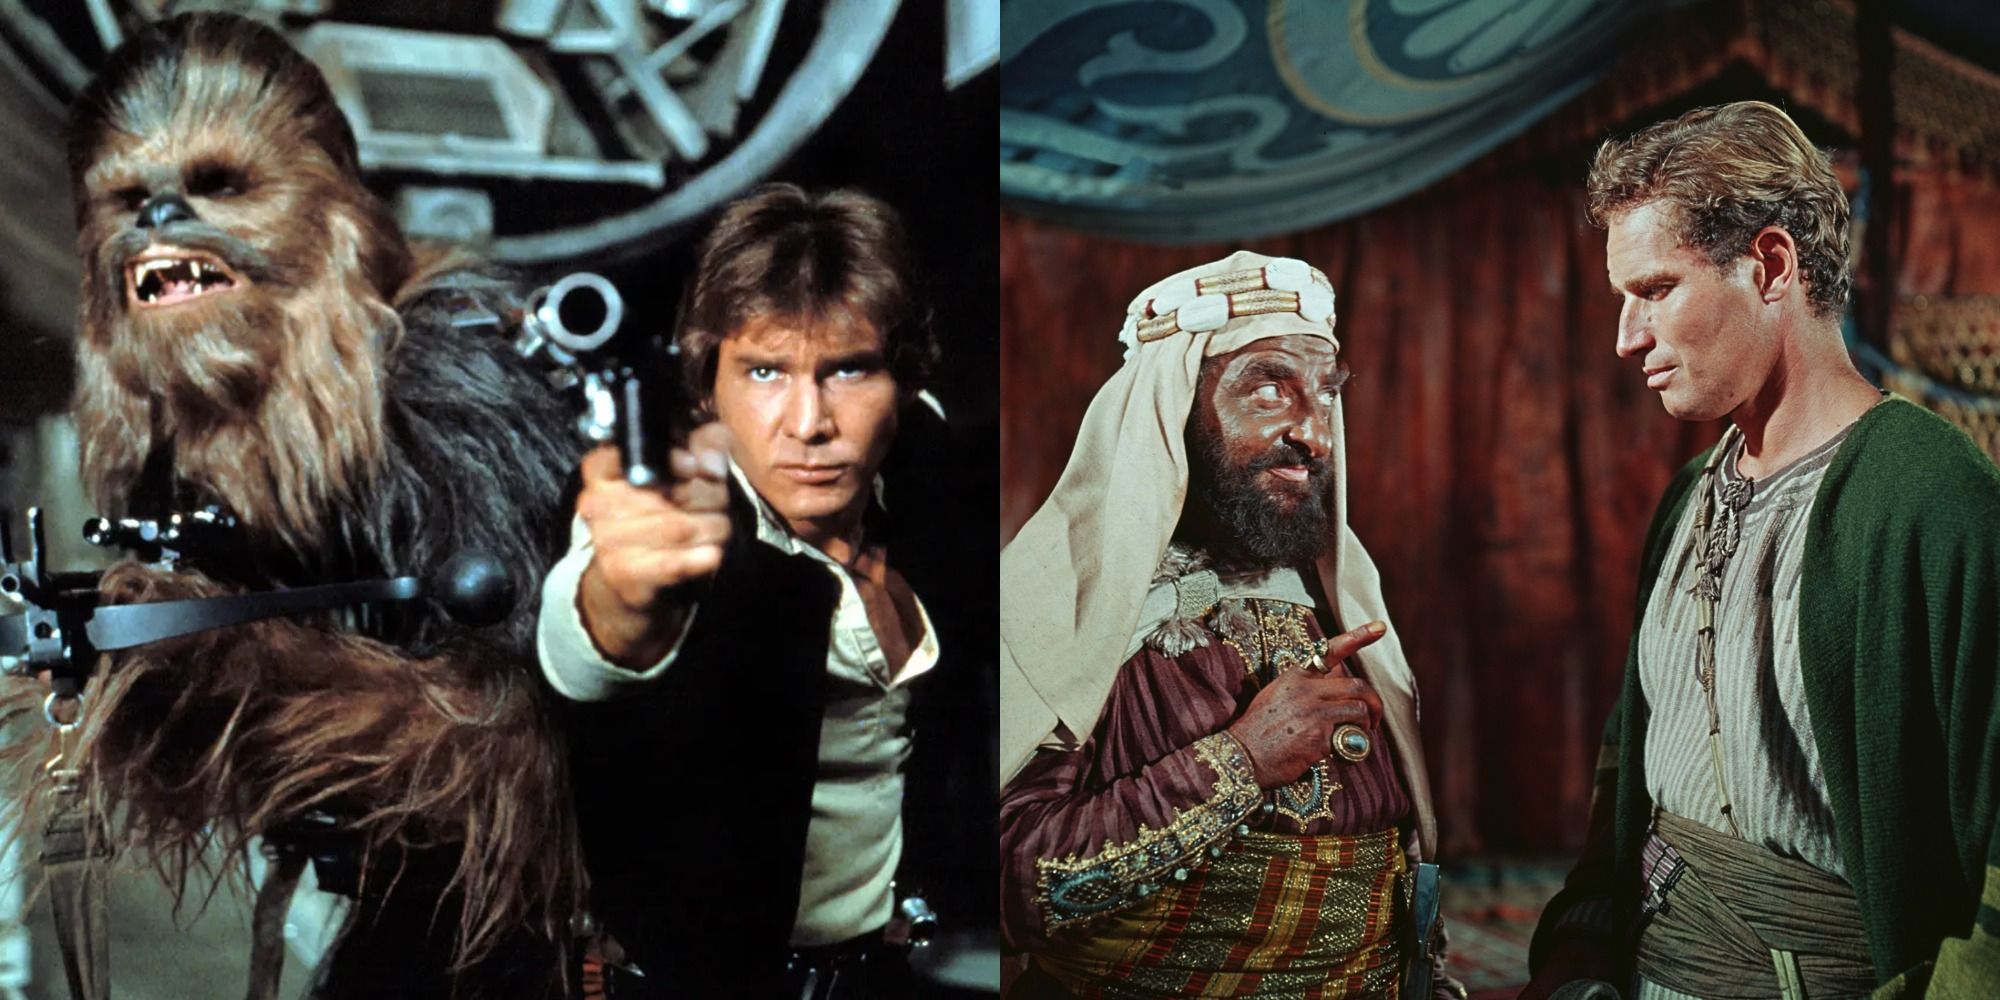 Two side by side images from Star Wars and Ben Hur